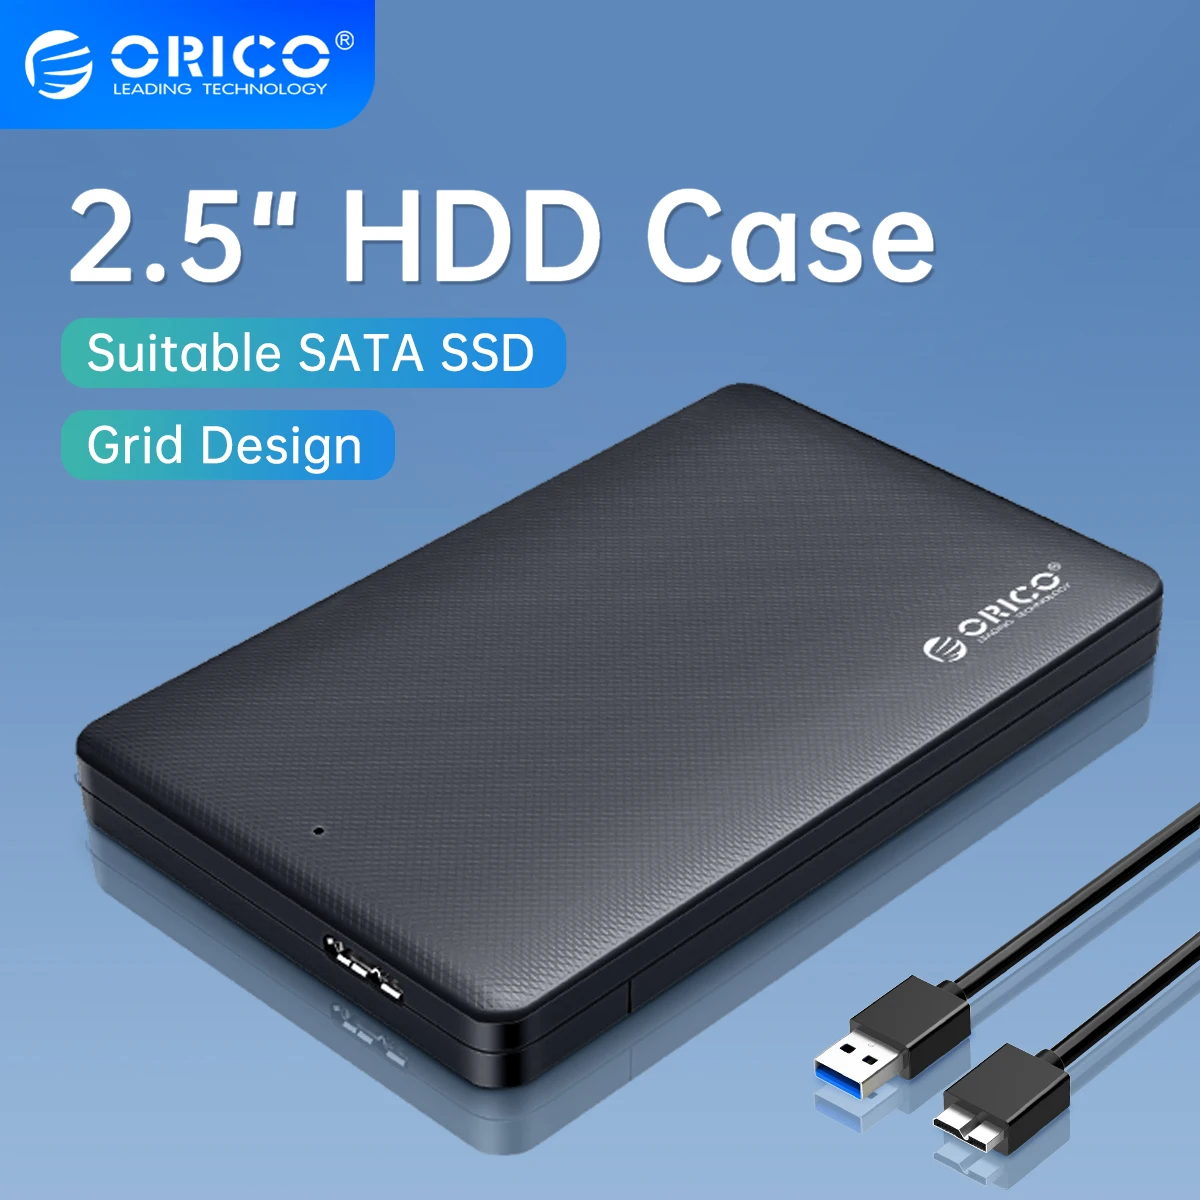 ORICO SATA 3.0 to USB3.0 External Hard Drive Case 2.5 inch HDD Enclouse Adapter for Samsung Seagate SSD HDD Hard Disk Box